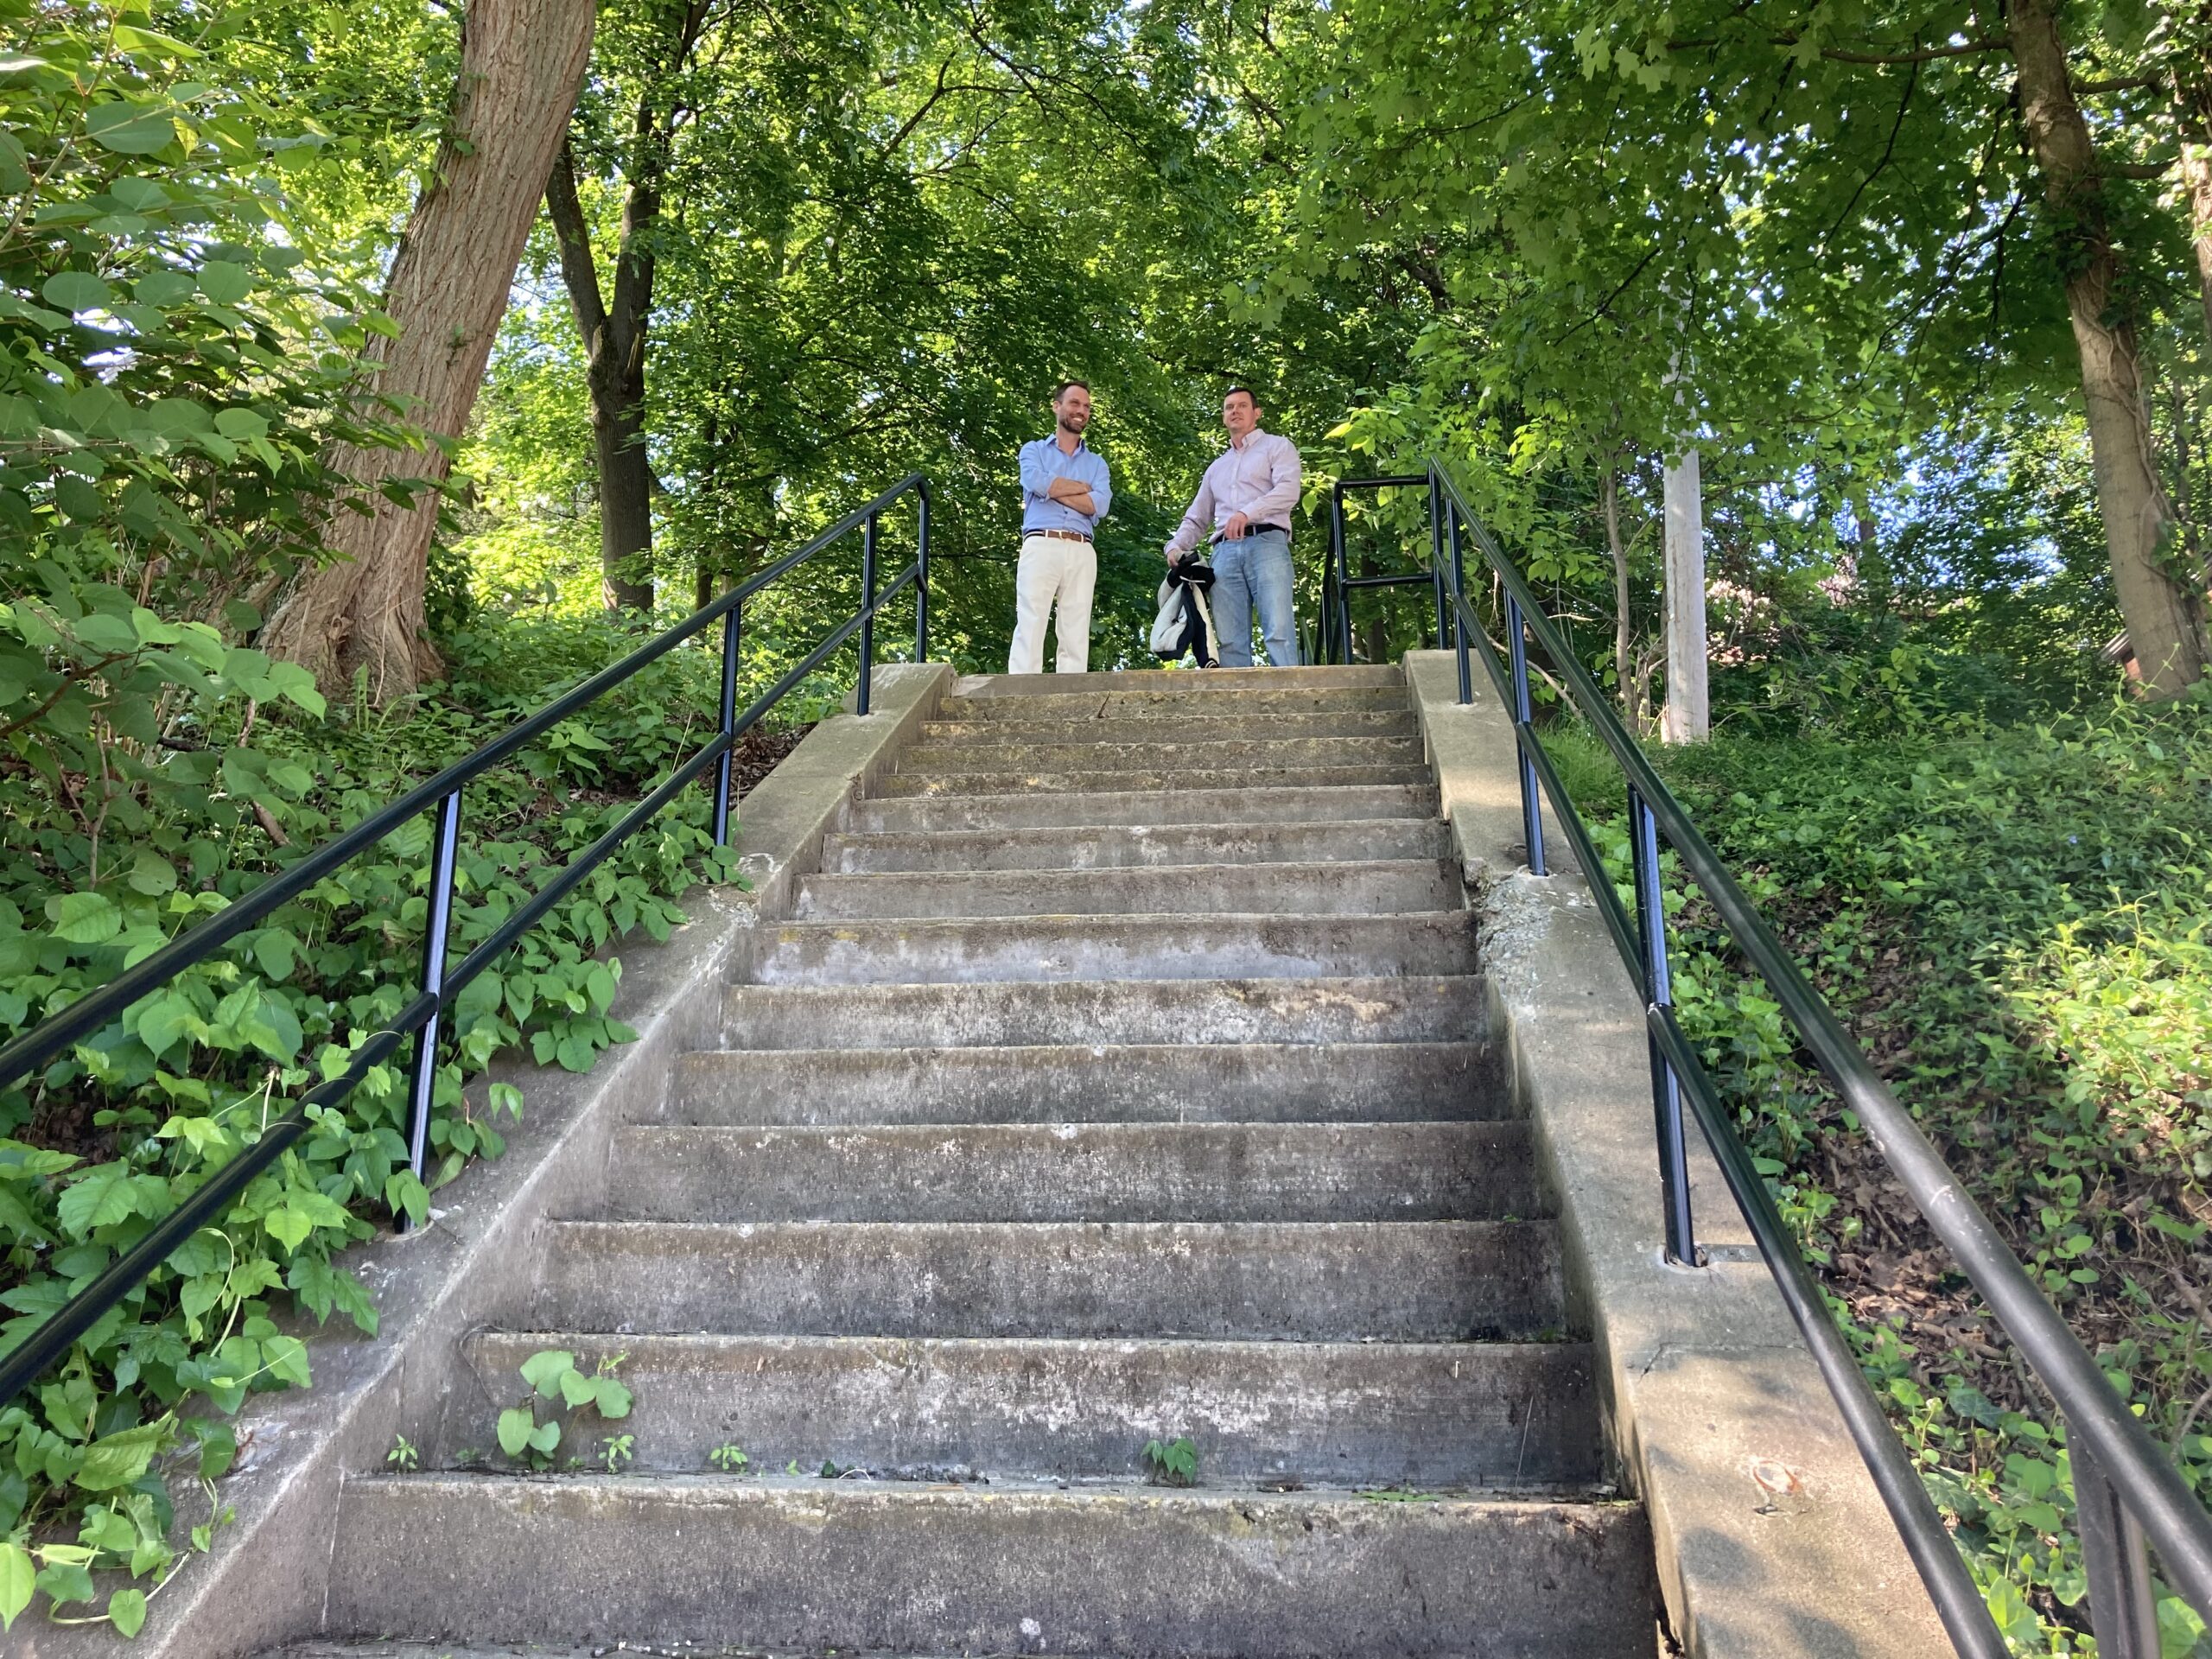 Important steps: Crafton tackles repairs on public stairways